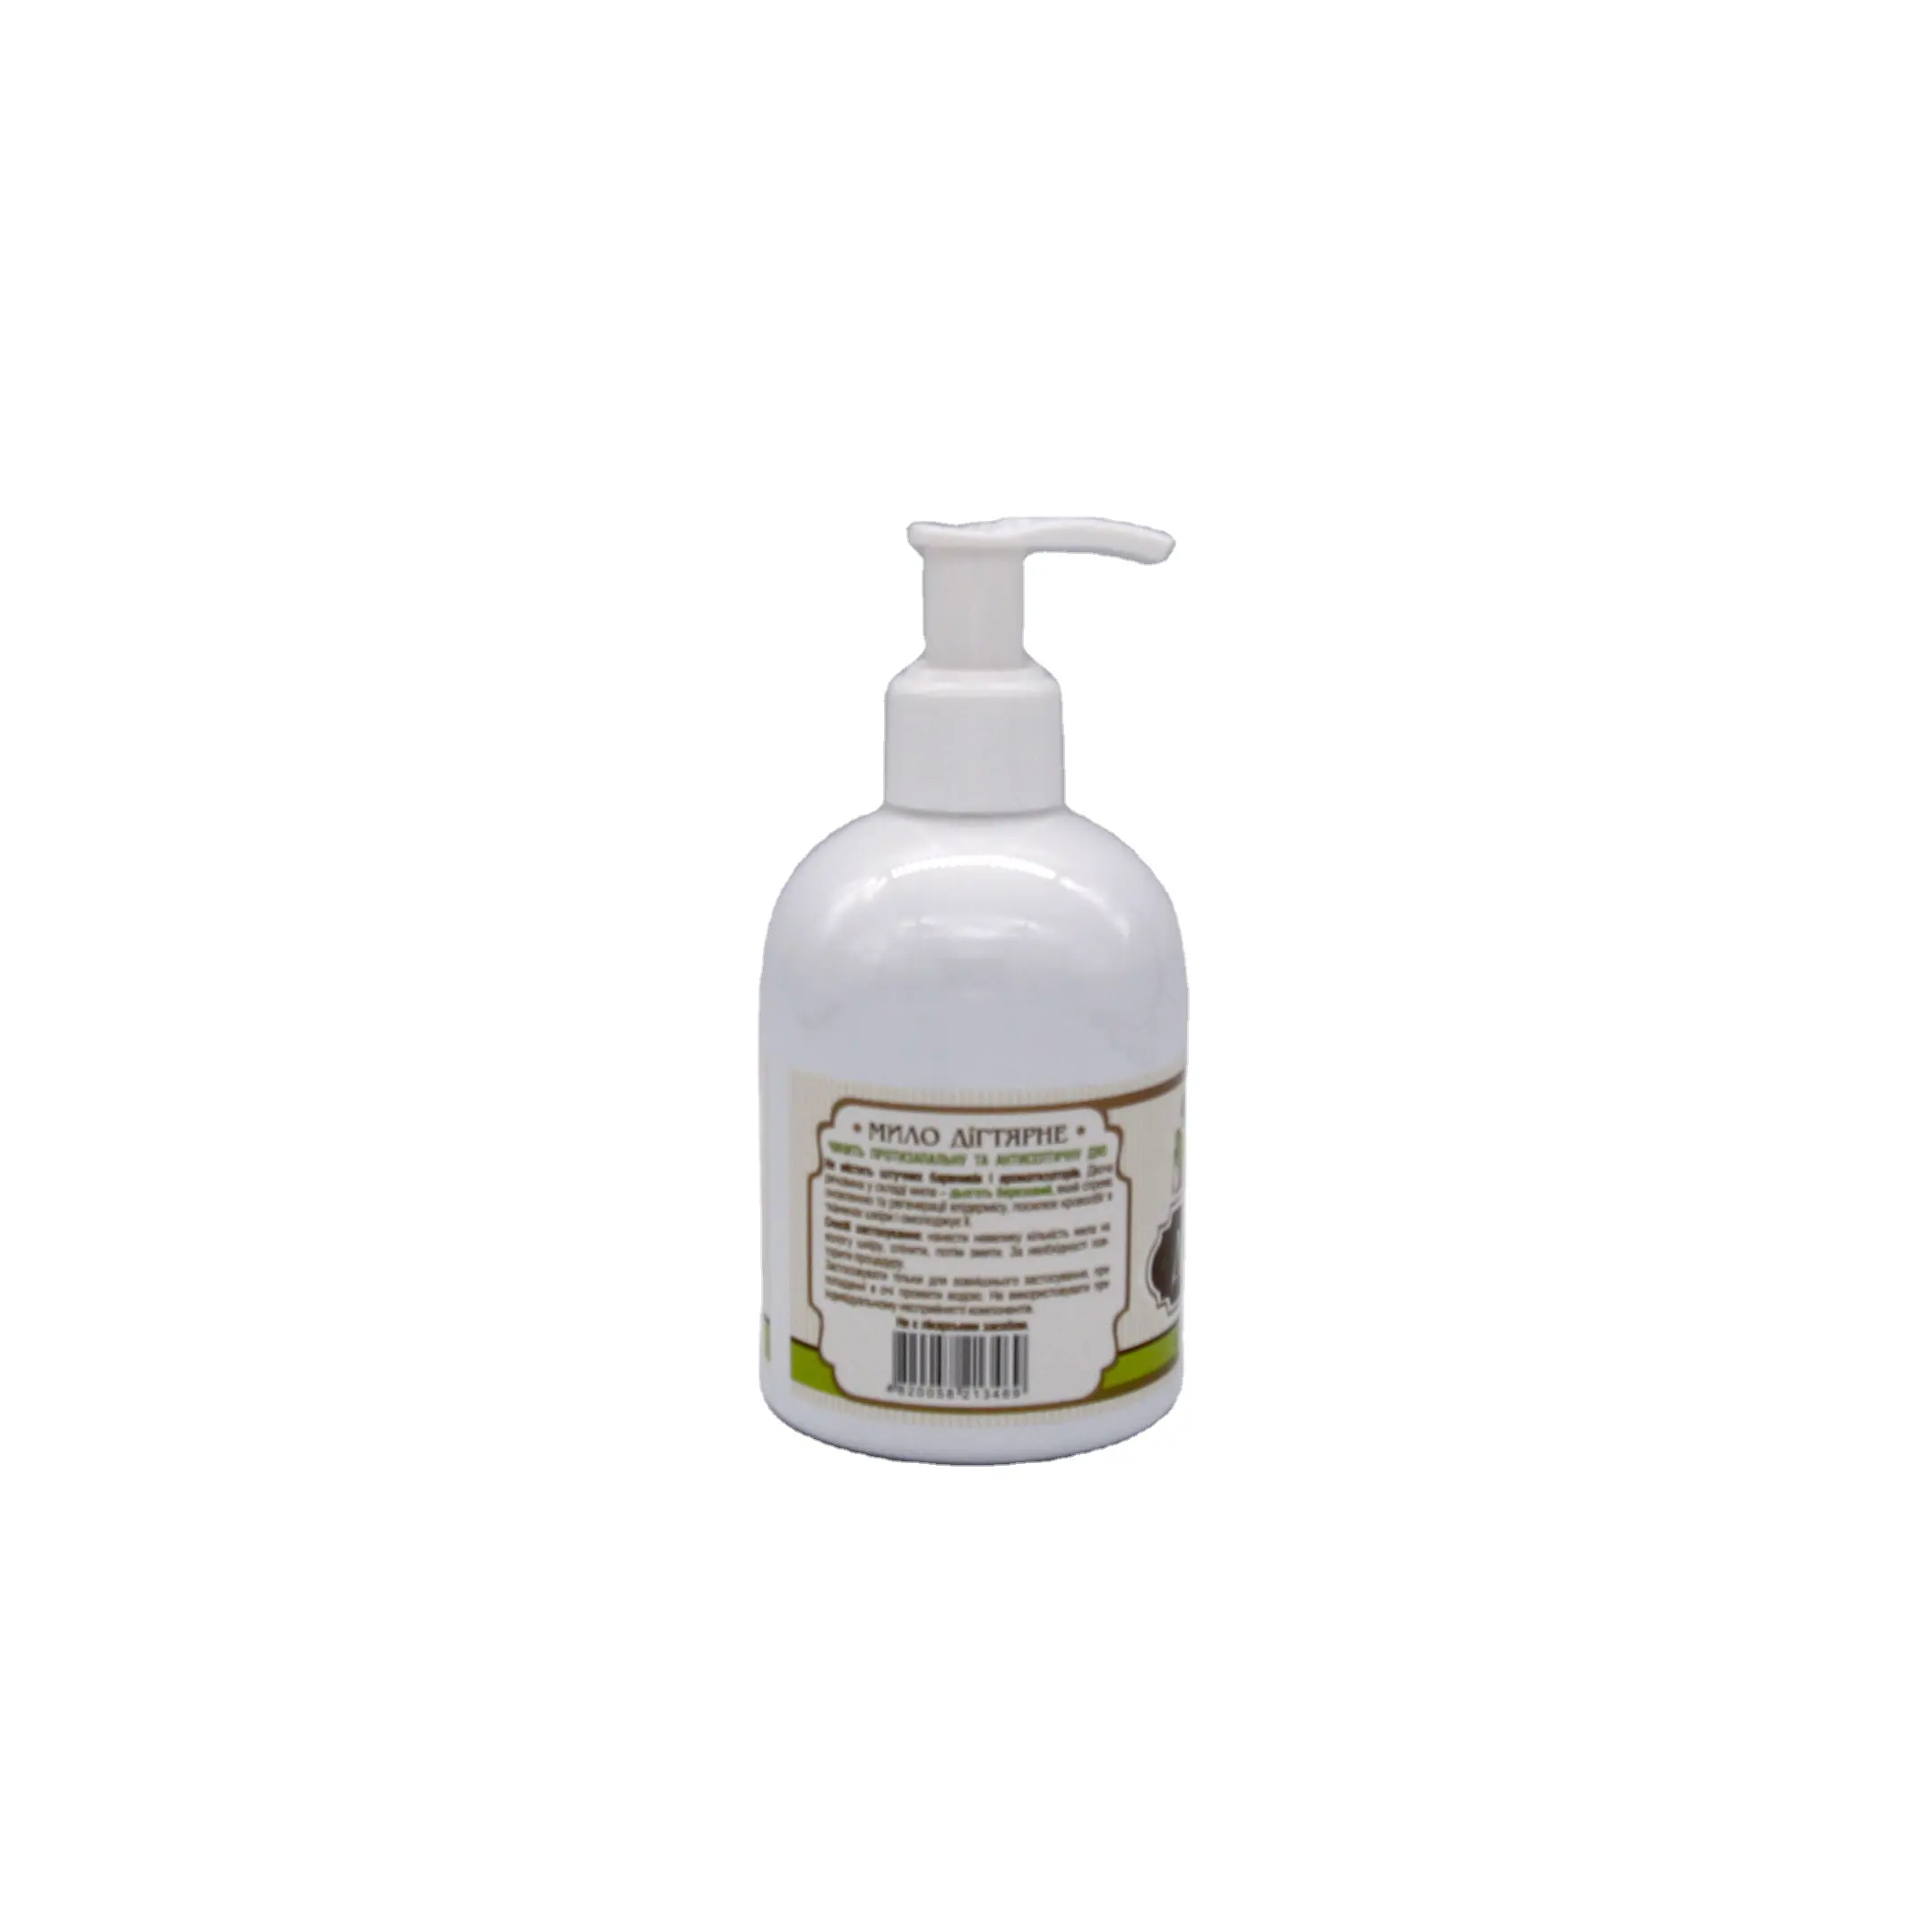 Customized Size Available by Genuine Quality Supplier of Tar Liquid Soap Available at Low Price for Bulk Buyers